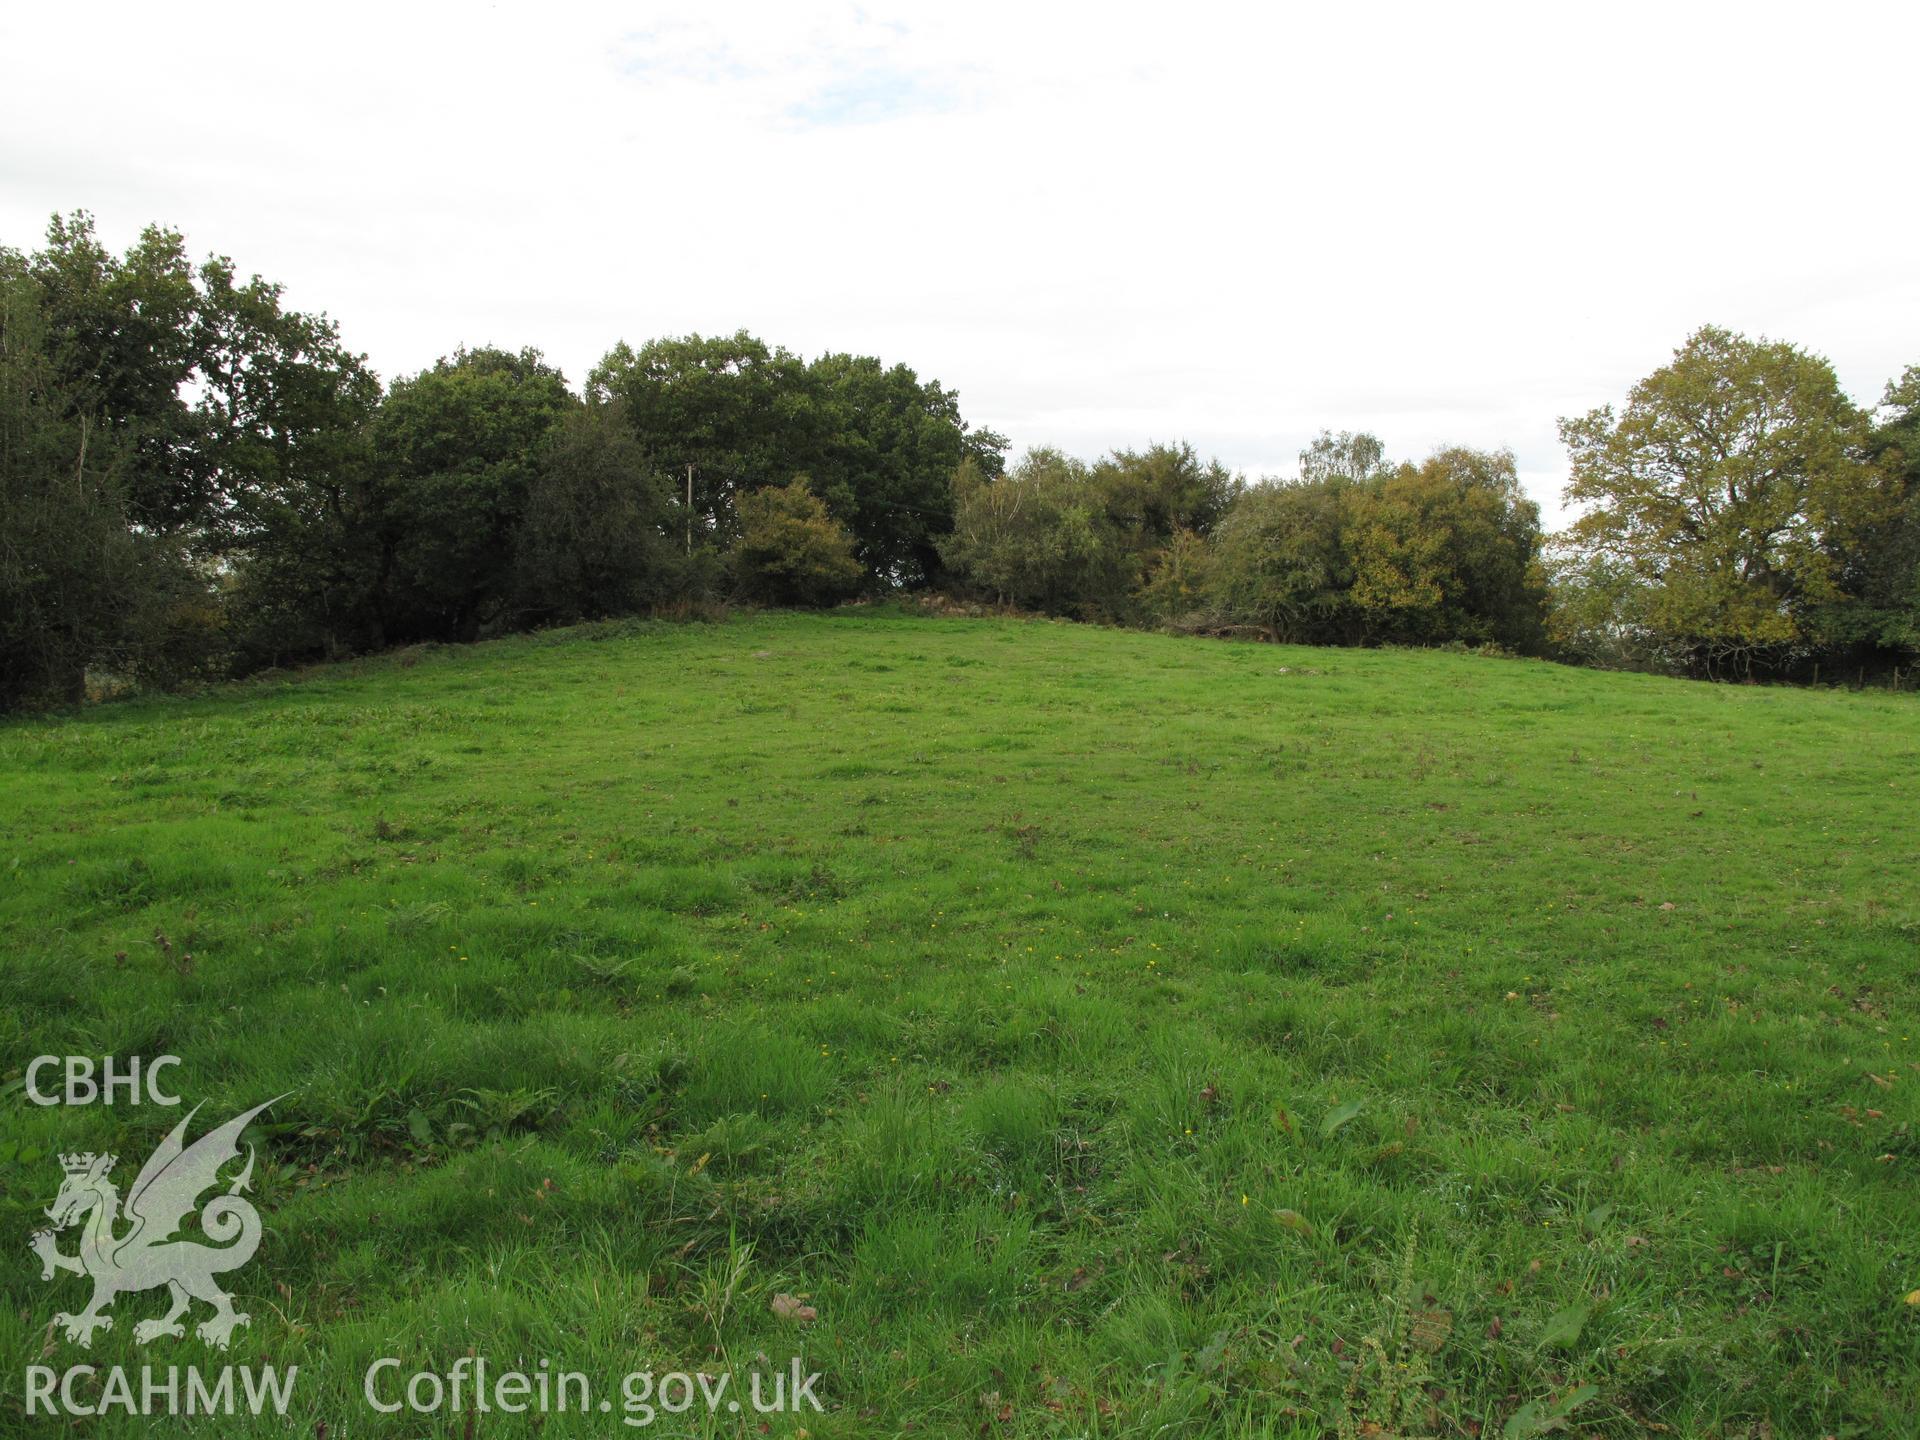 Site of the battle at Craig-y-dorth from the south, taken by Brian Malaws on 26 September 2011.